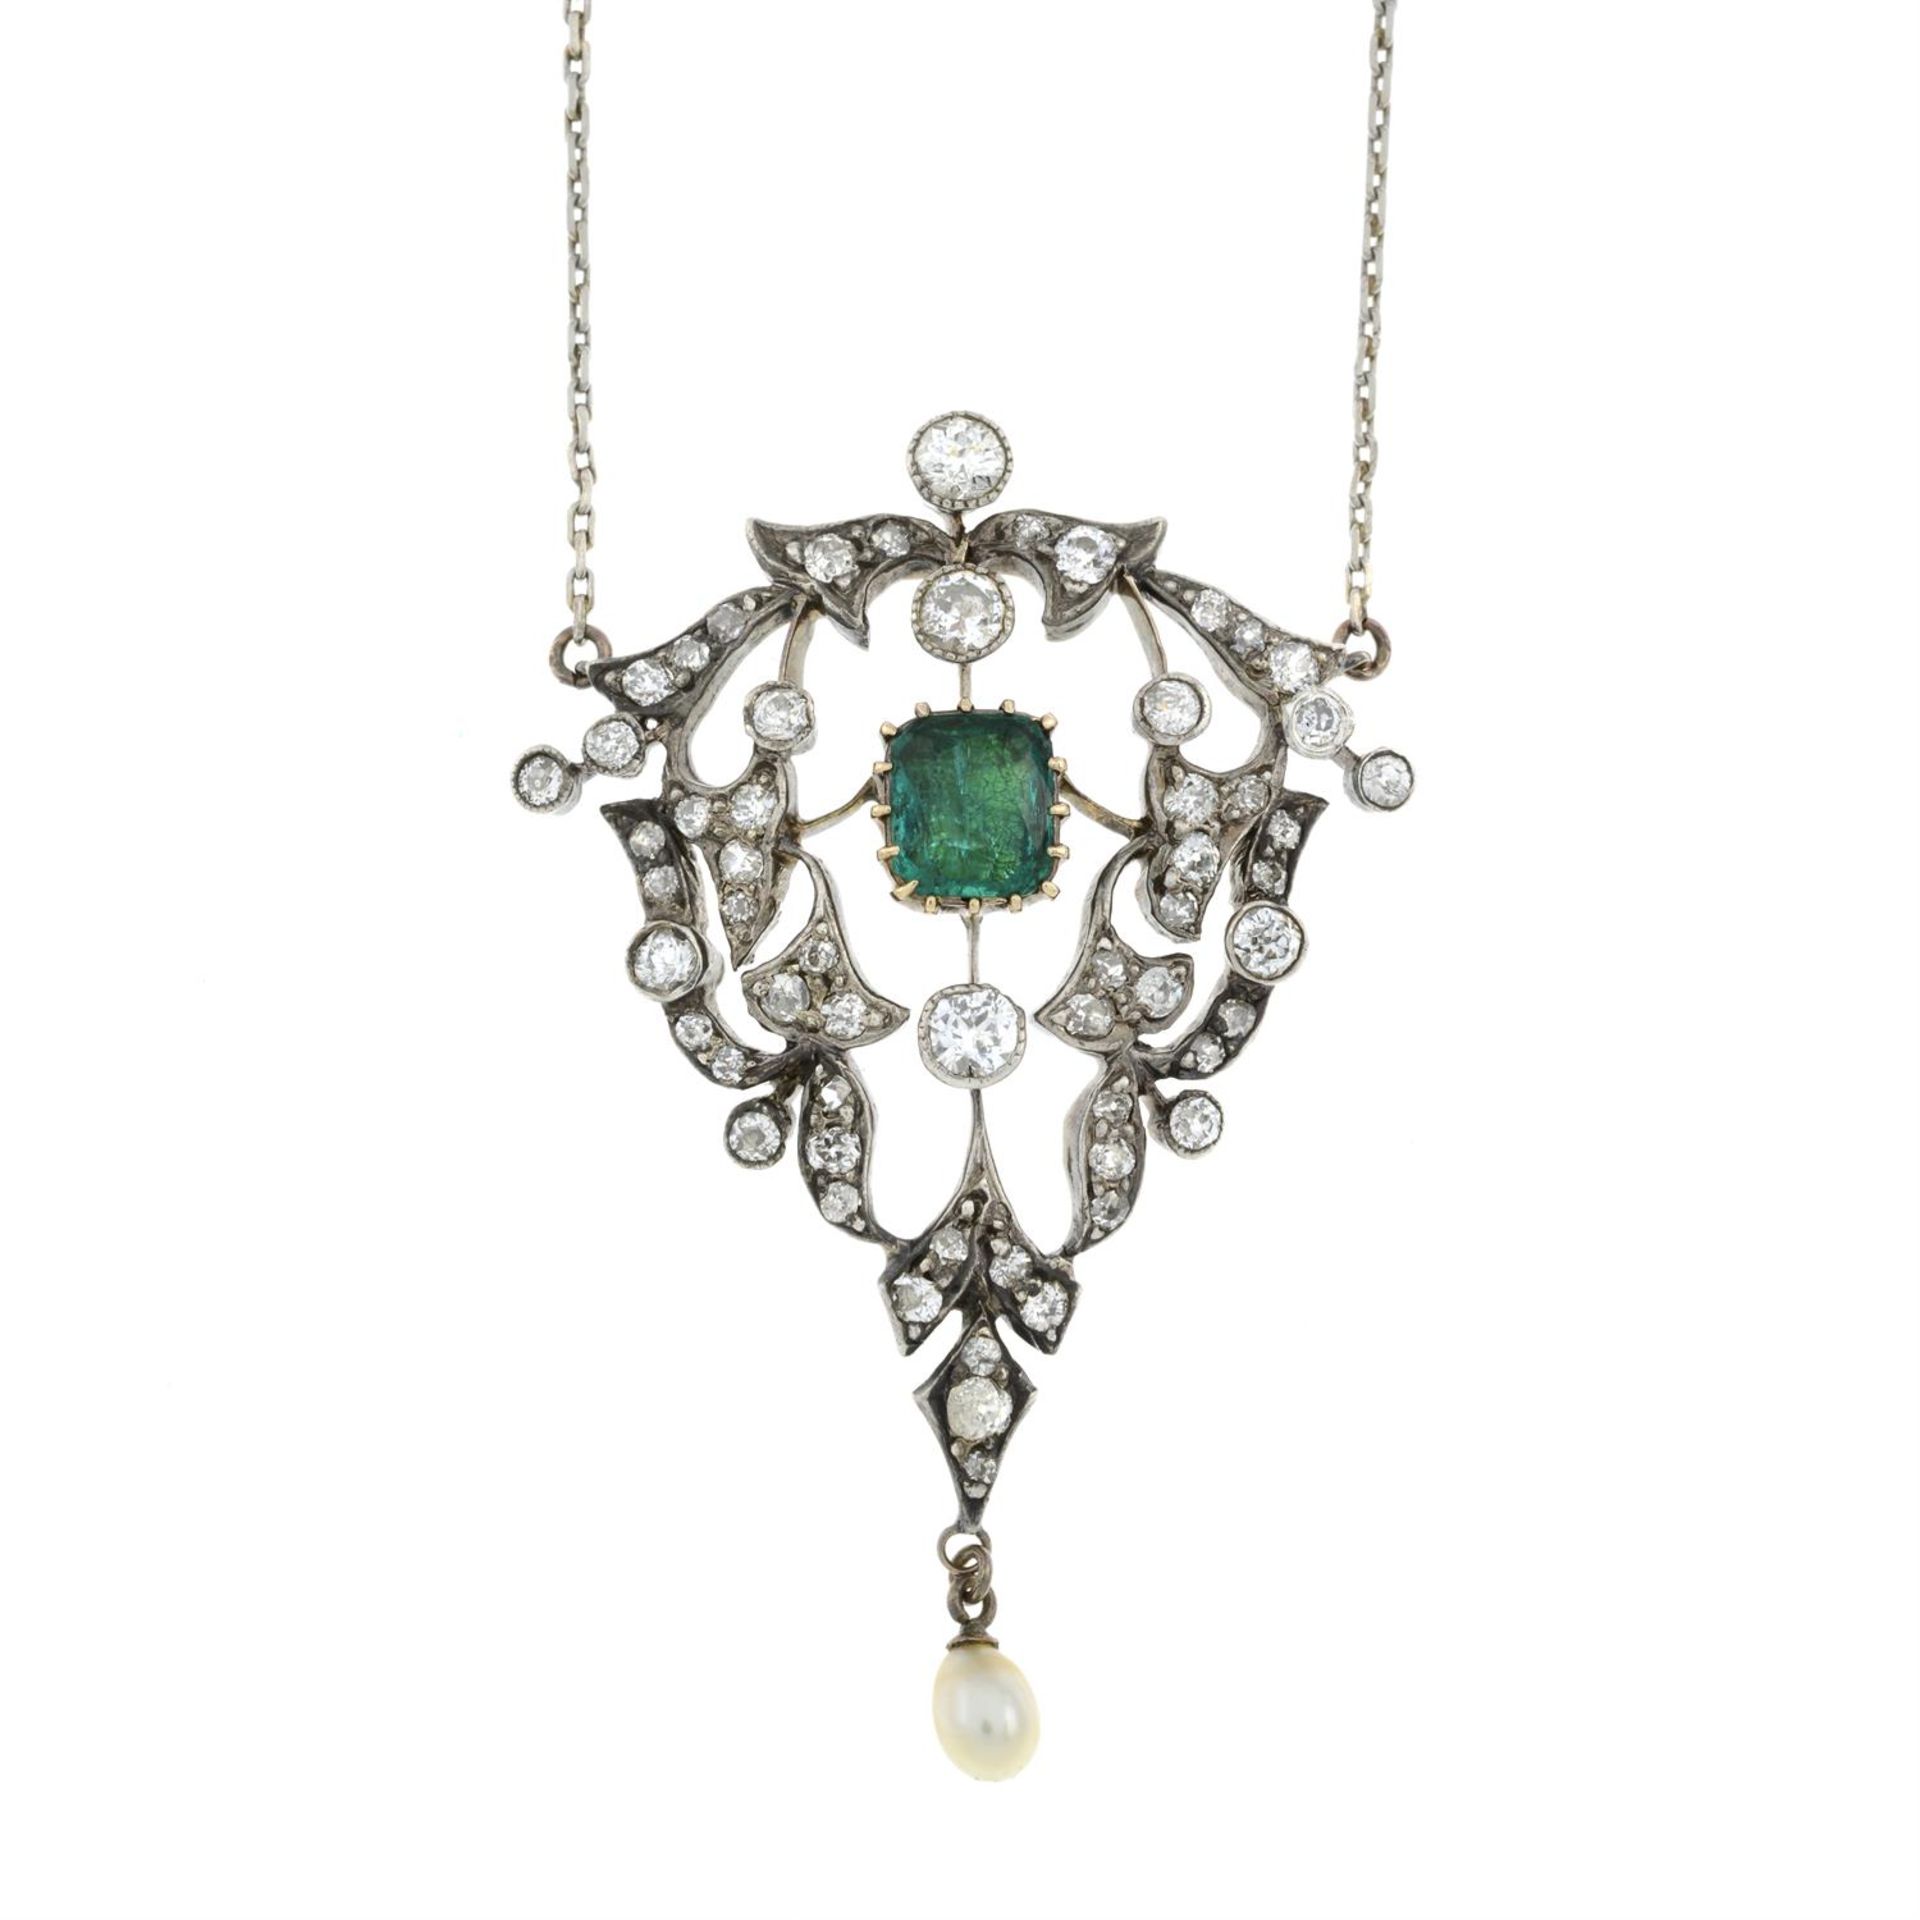 19th century emerald, diamond and pearl necklace - Image 3 of 7